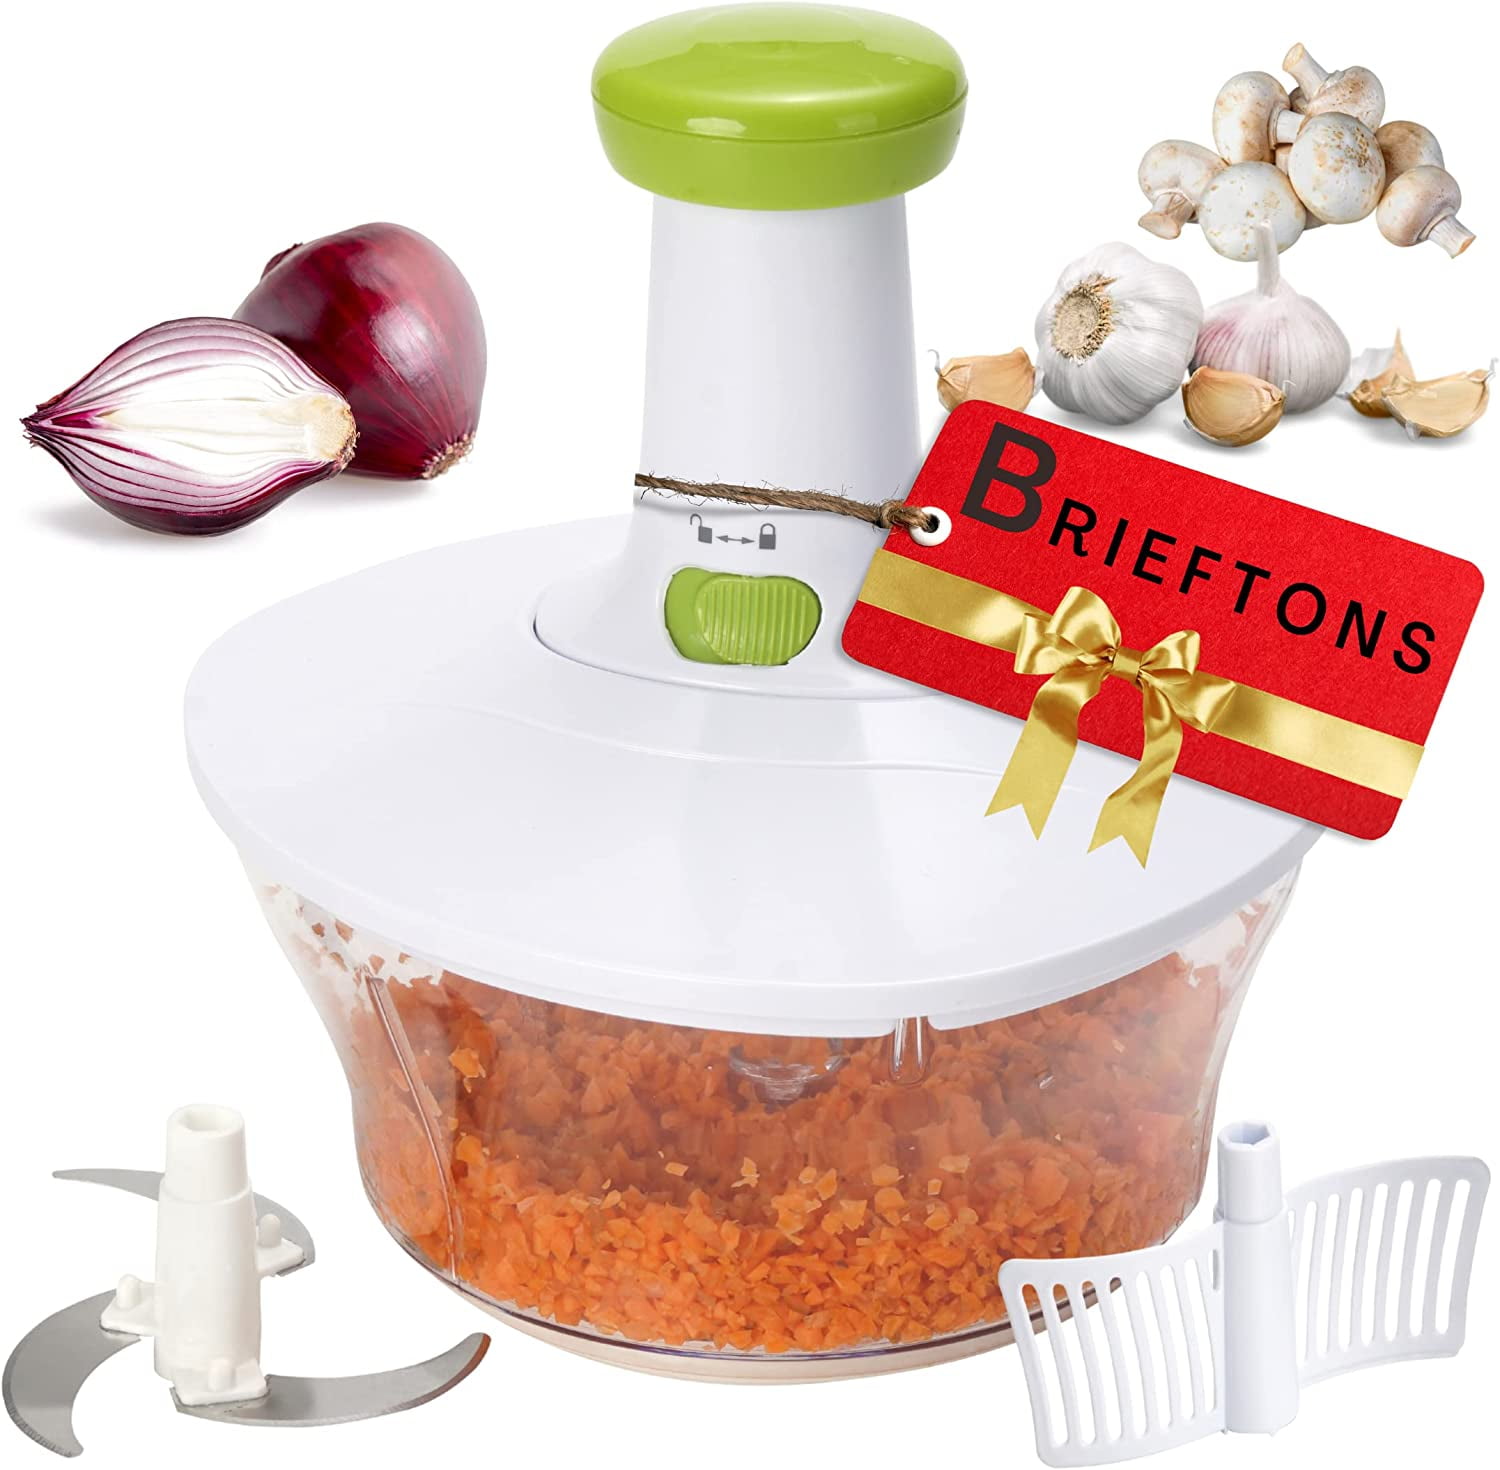 Brieftons Express Food Chopper: Large 6.8-cup, Quick & Powerful Manual Hand Held Chopper/Mixer to Chop Fruits, Vegetables, Herbs, Onions for Salsa